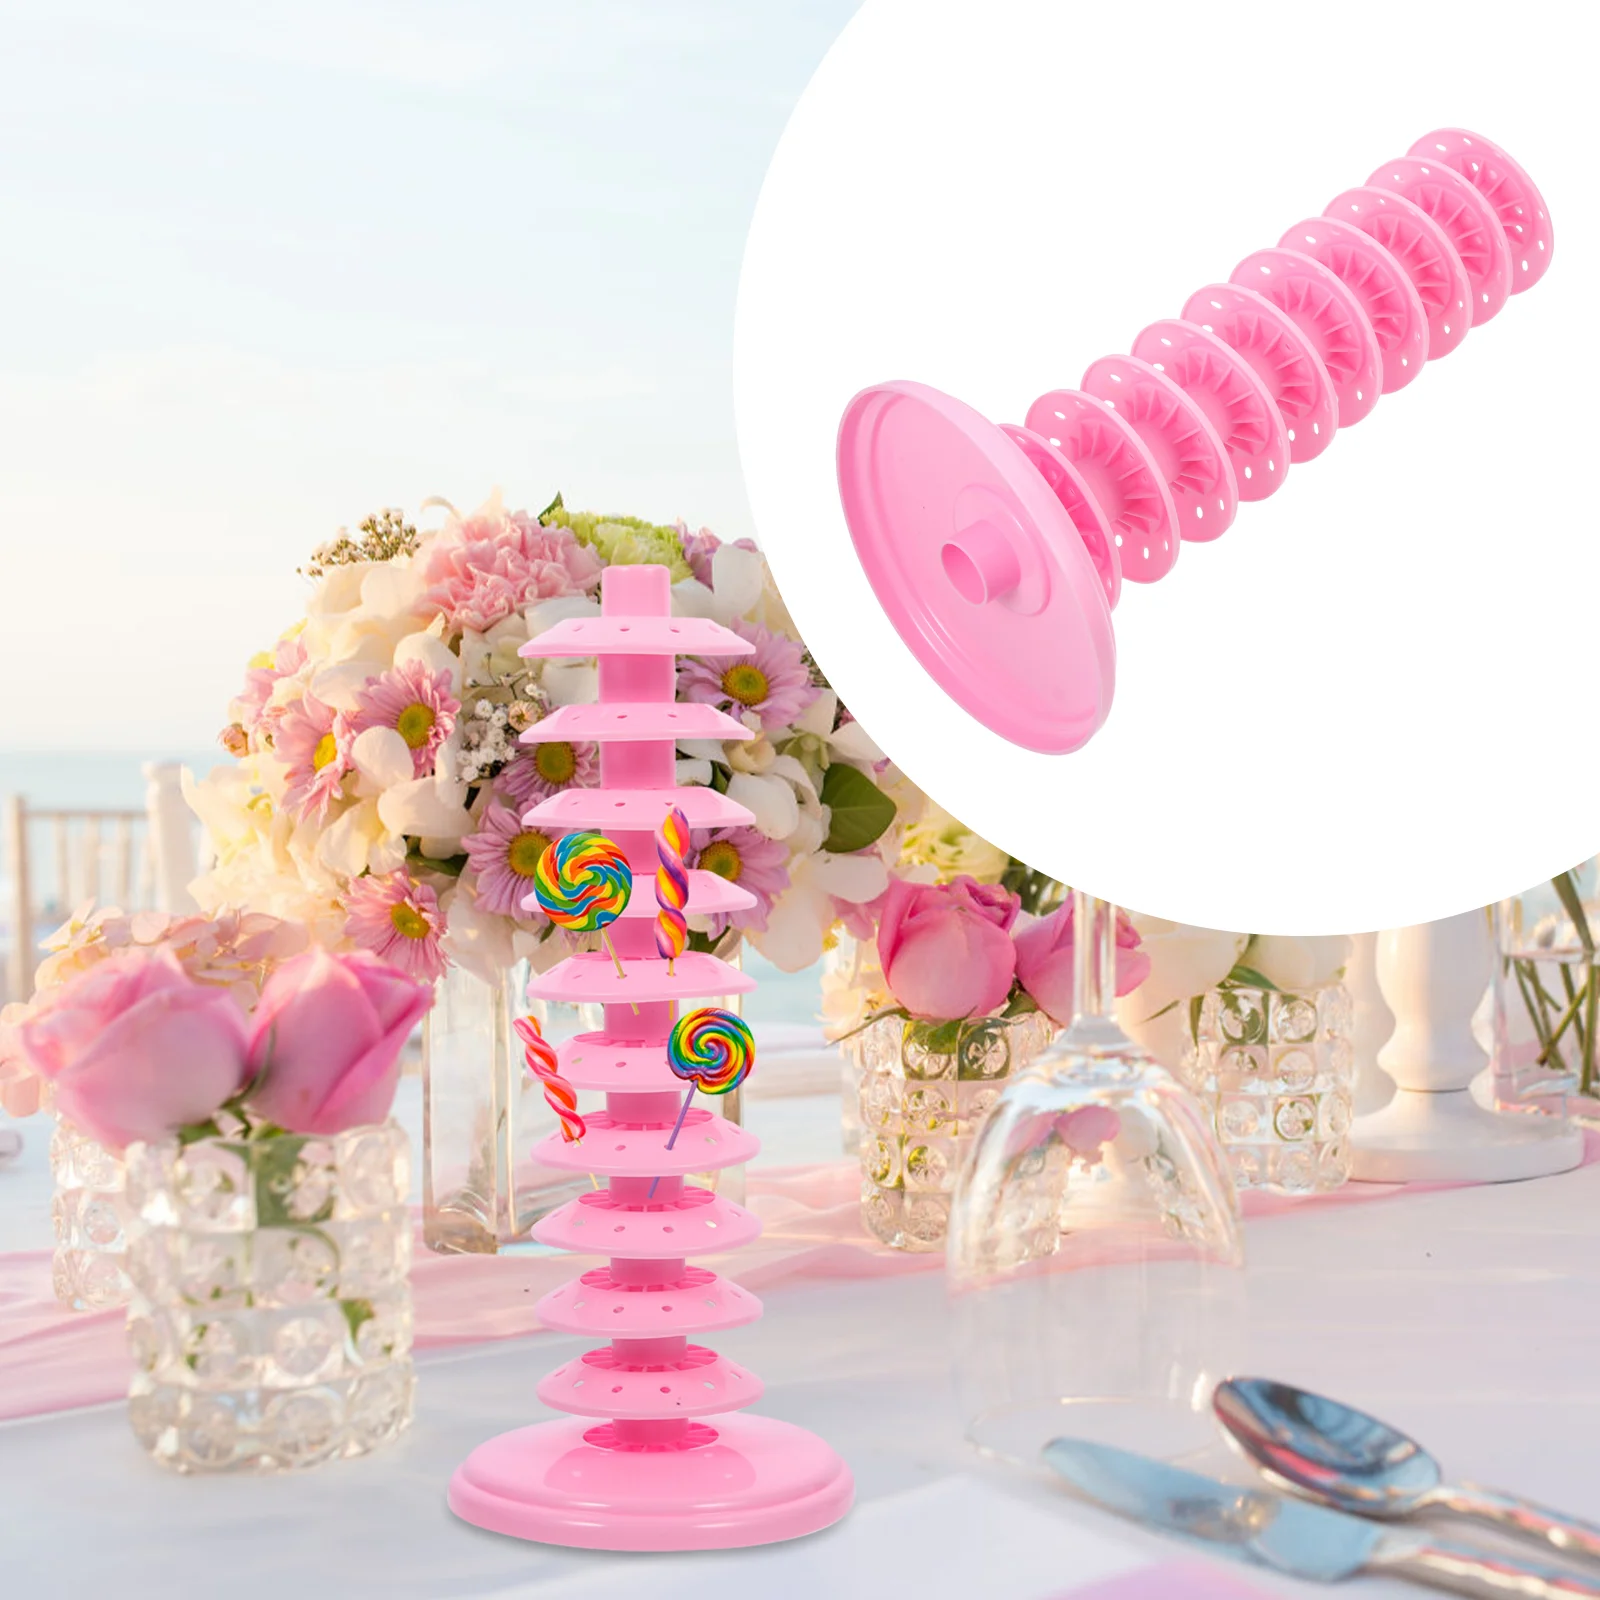 

Lollipop Stand Holder Cake Display Party Stands Candy Base Tiered Decorative Pop Dessert Wedding Table Show Drying Rack Holders